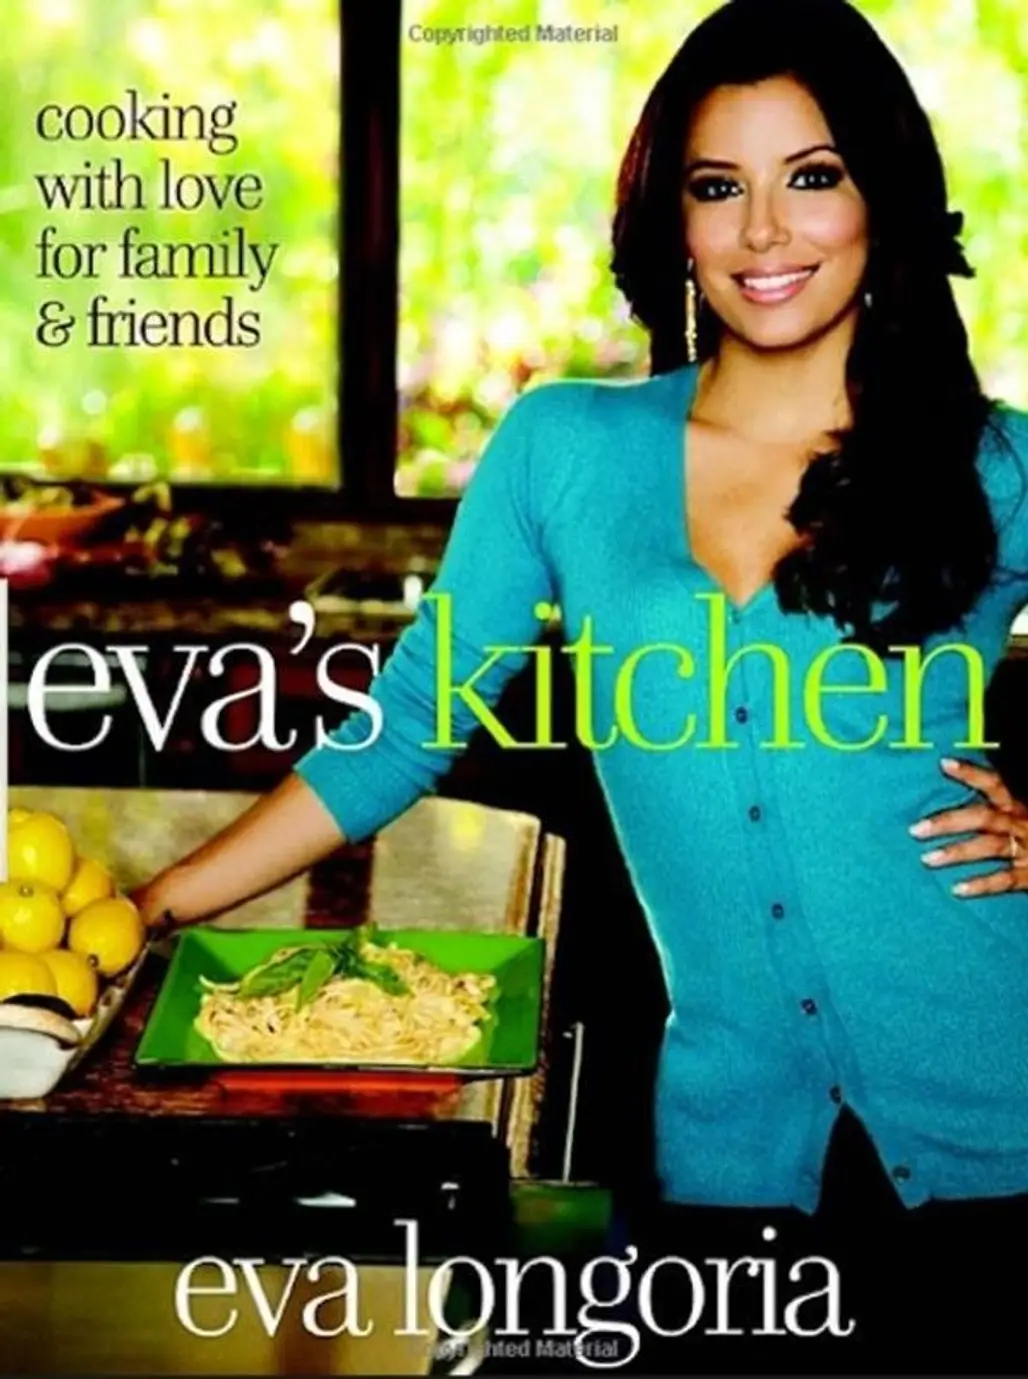 ‘Eva's Kitchen: Cooking with Love for Family and Friends’ by Eva Longoria